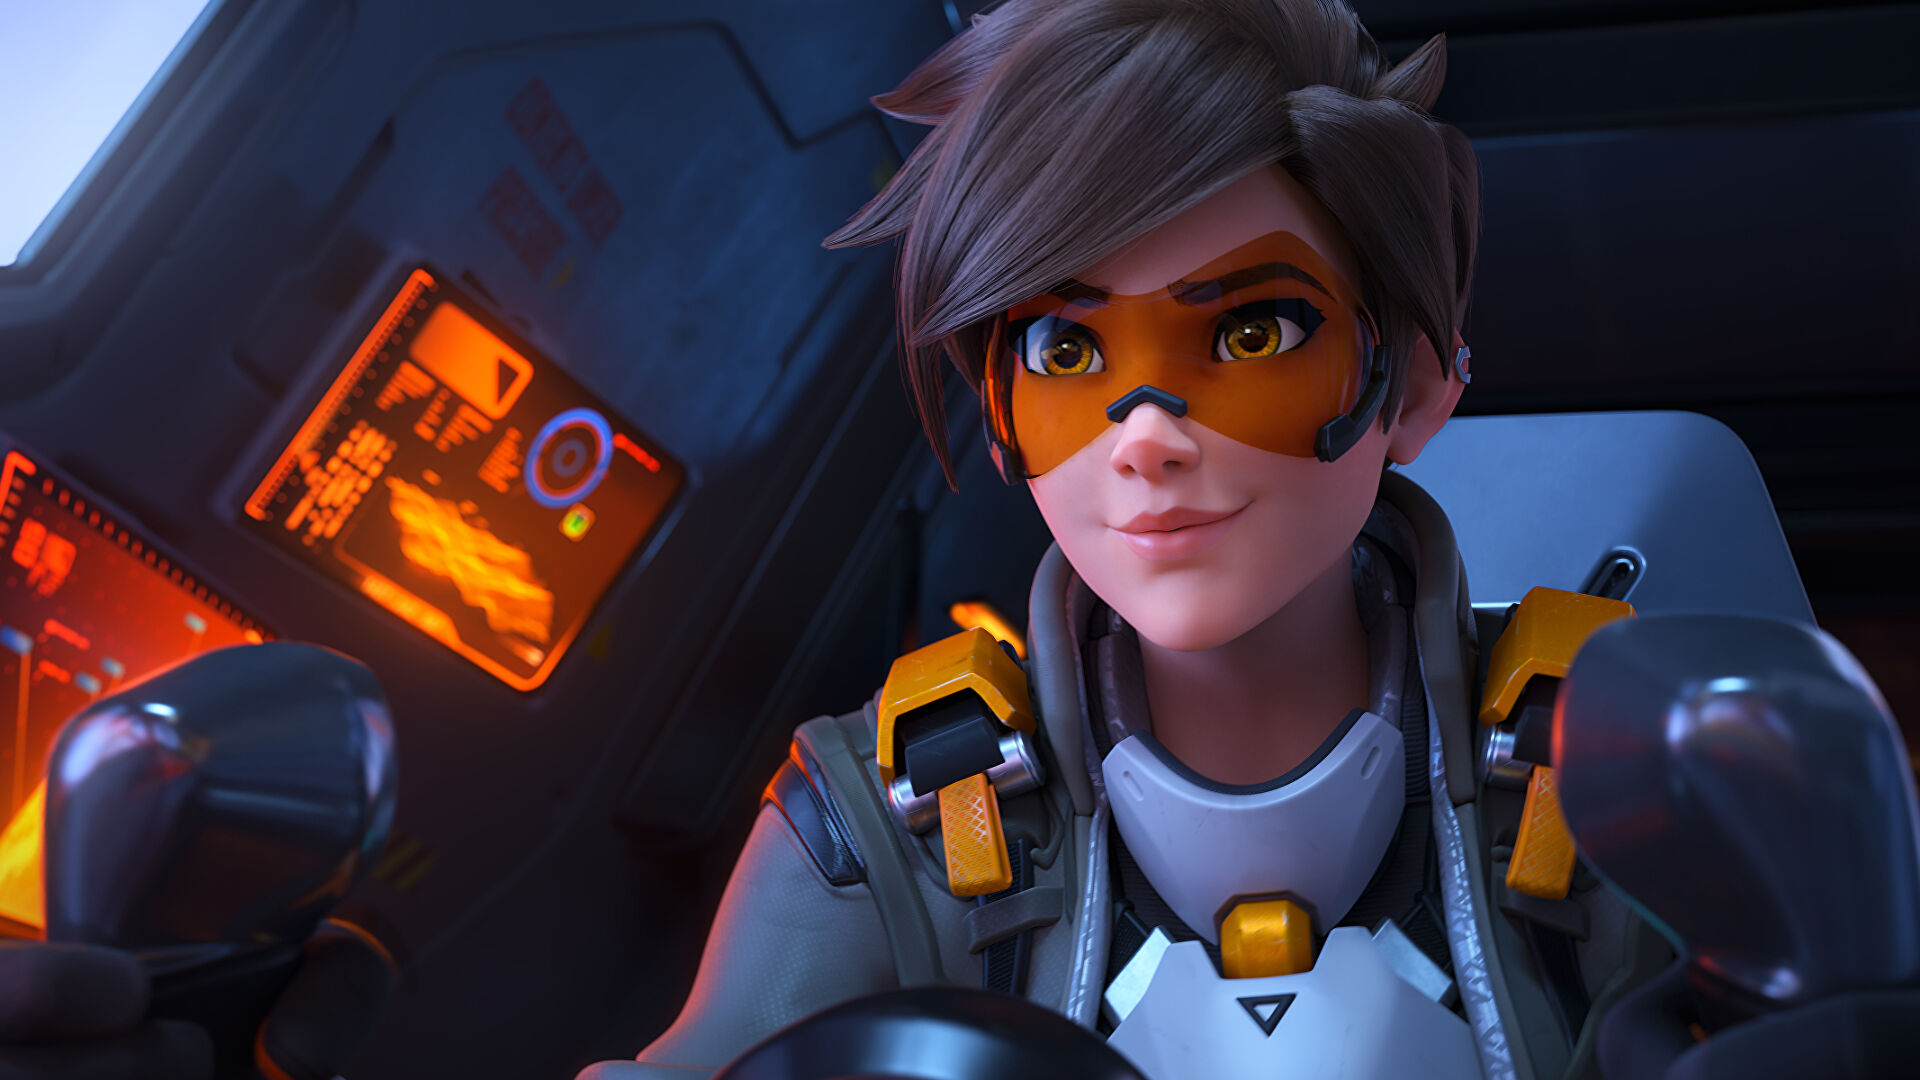 Overwatch 2's frustrating phone registration requirement axed for most players